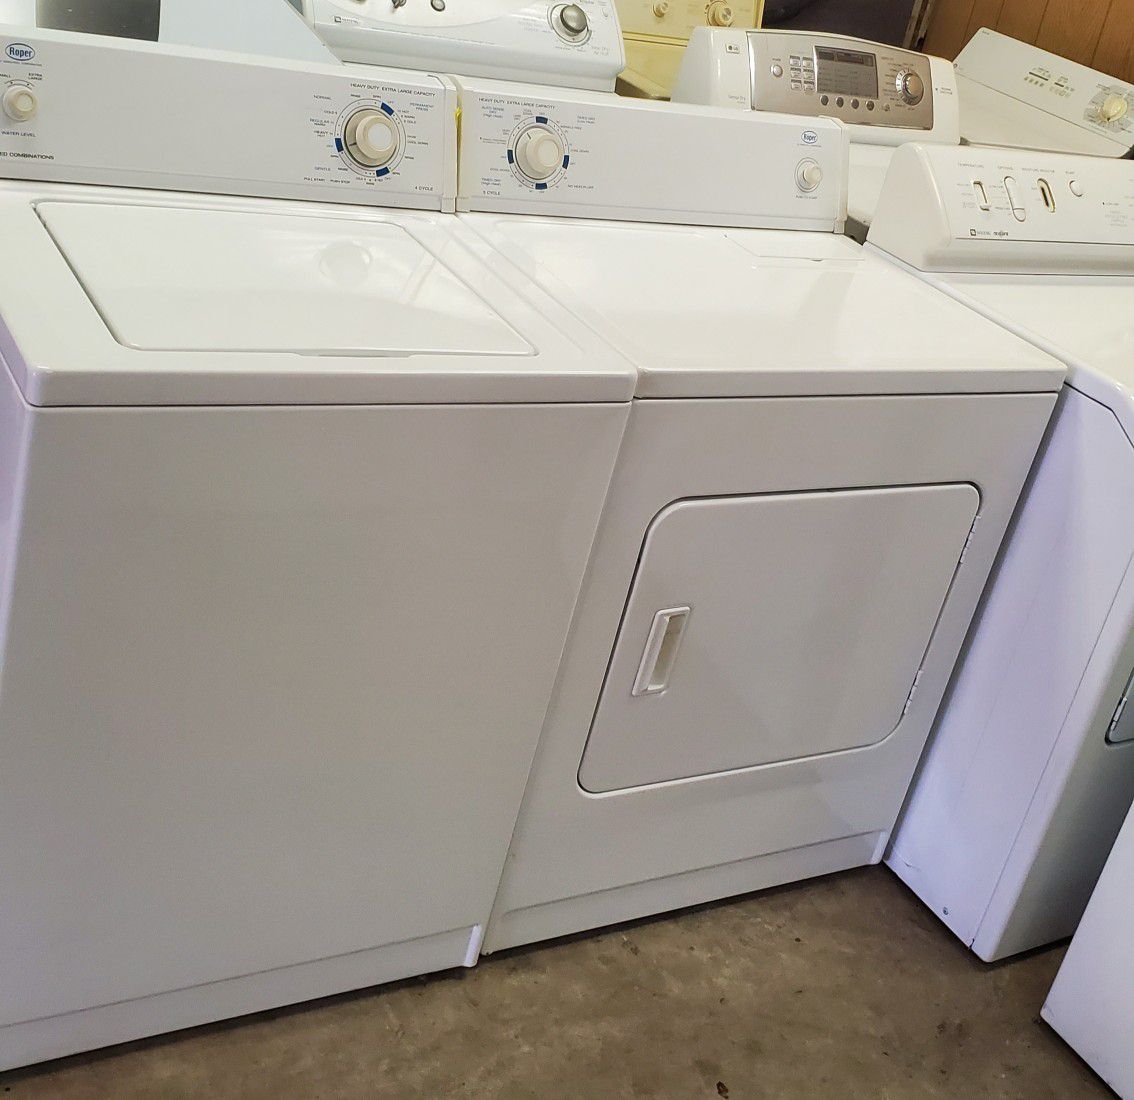 Roper washer and dryer set both works well